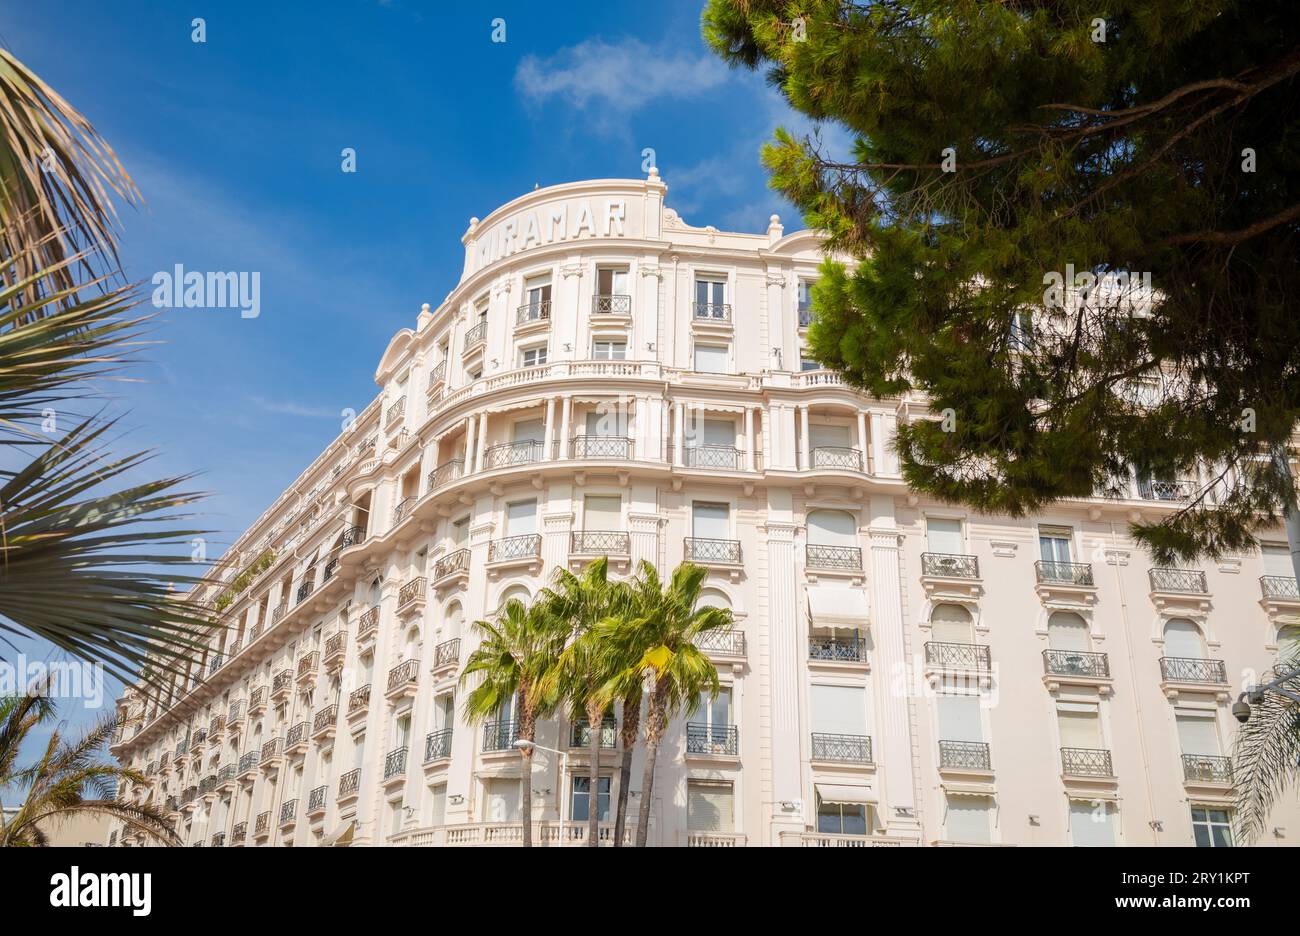 The luxury Tiara Miramar Beach Hotel & Spa located on the Boulevard de la Croisette, directly opposite the Mediterranean Sea, in Cannes, France. One o Stock Photo